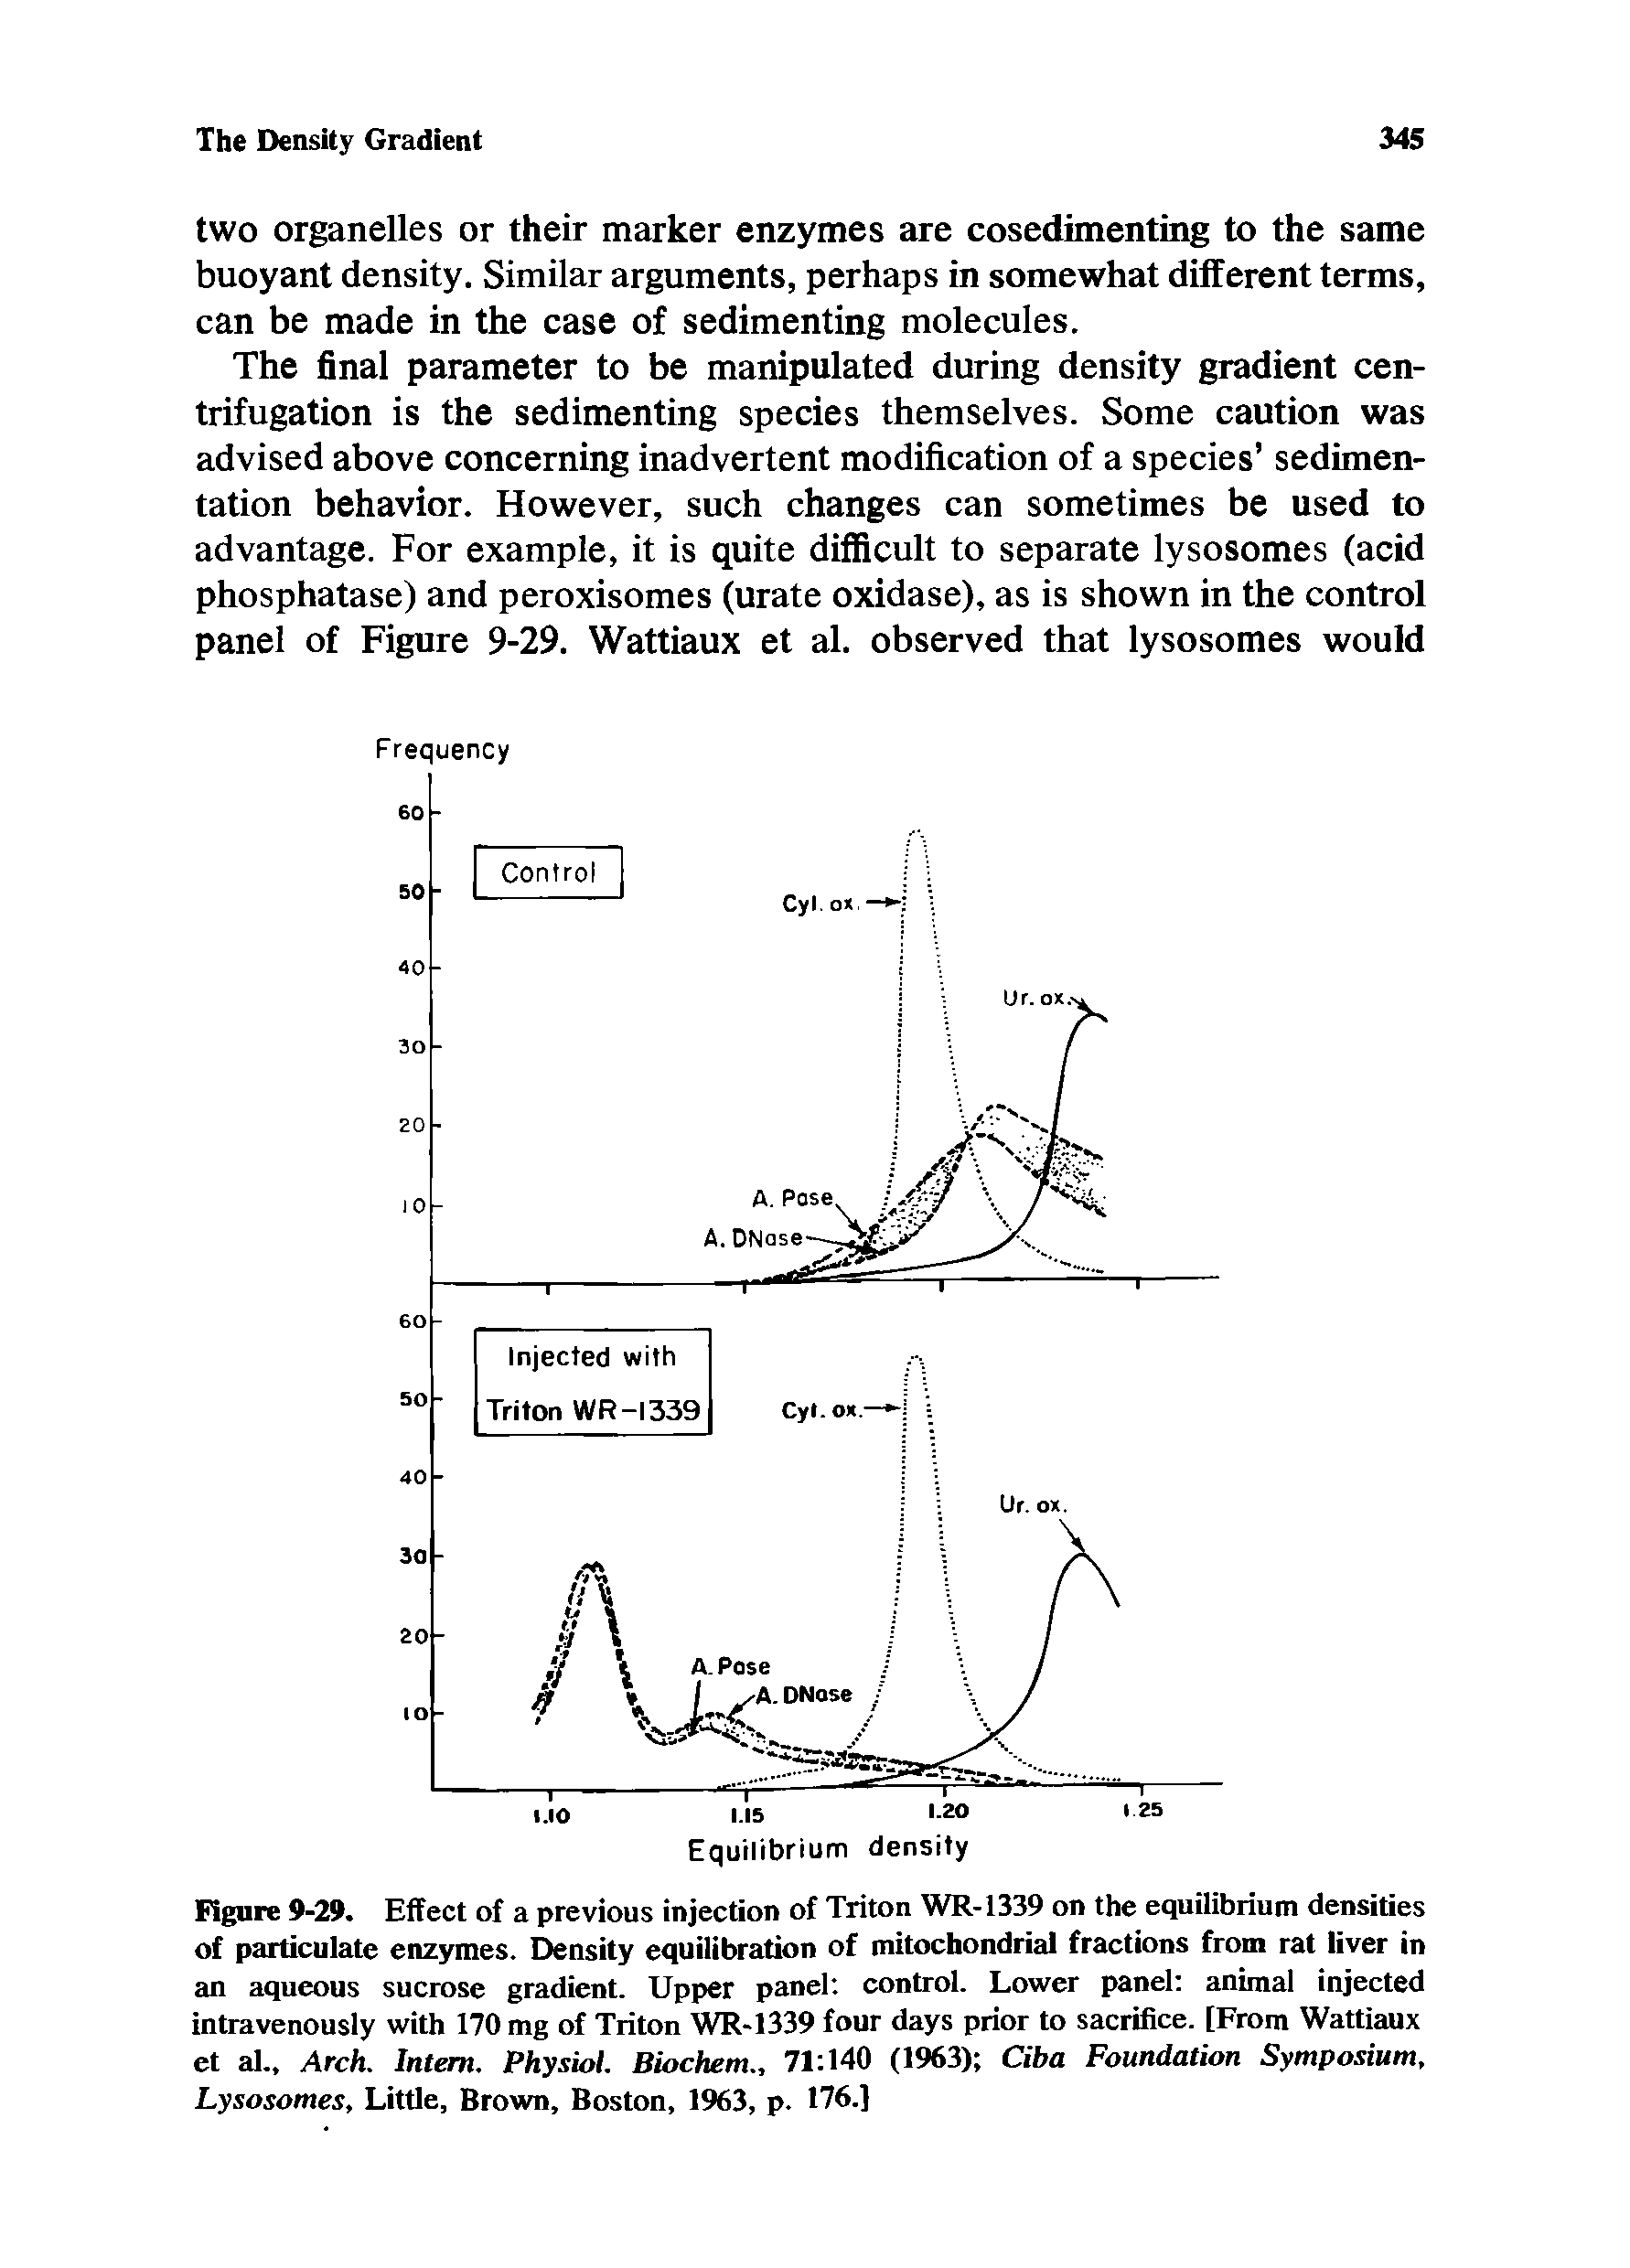 Figure 9-29. Effect of a previous injection of Triton WR-1339 on the equilibrium densities of particulate enzymes. Density equilibration of mitochondrial fractions from rat liver in an aqueous sucrose gradient. Upper panel control. Lower panel animal injected intravenously with 170 mg of Triton WR-1339 four days prior to sacrifice. [From Wattiaux et al.. Arch. Intern. Physiol. Biochem., 71 140 (1963) Ciba Foundation Symposium, Lysosomes, Little, Brown, Boston, 1963, p. 176.]...